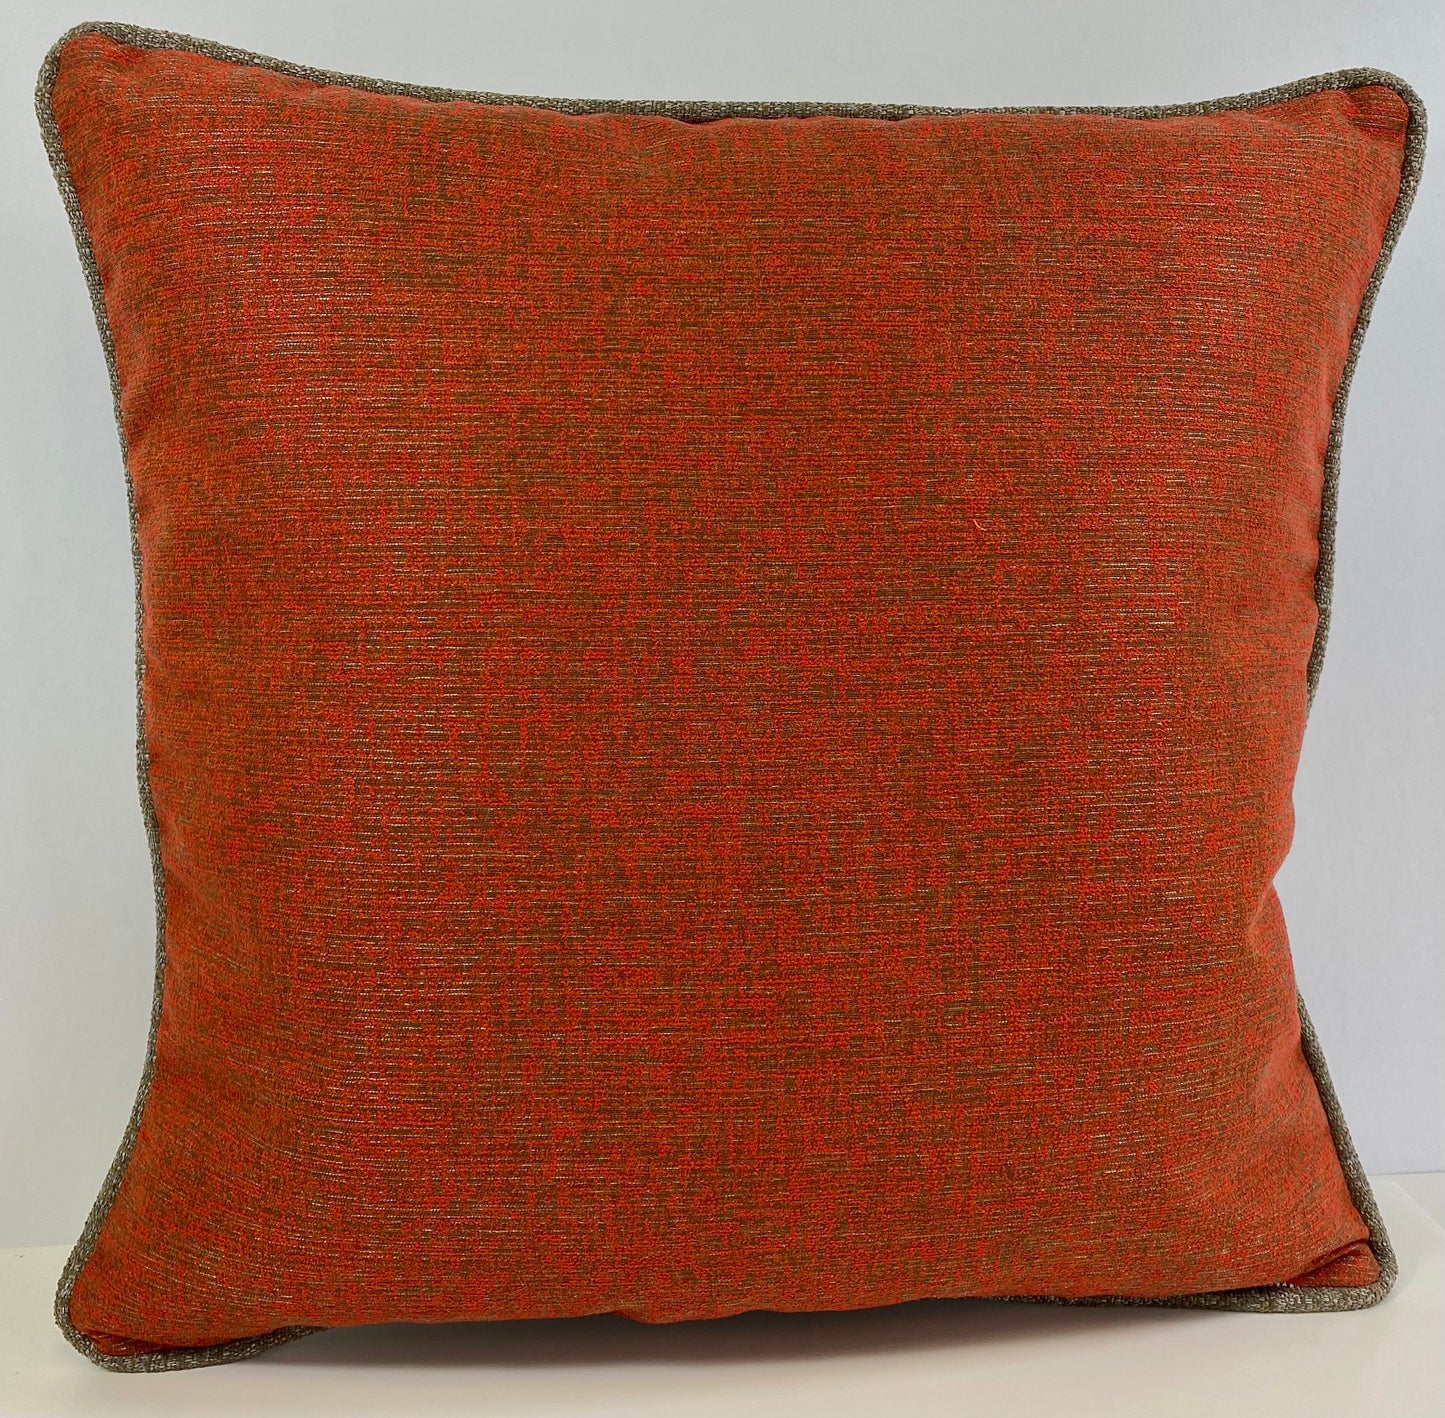 Luxury Outdoor Pillow - 22" x 22" - Maui - Sunset; Sunbrella fabric, or equivalent, with fiber fill